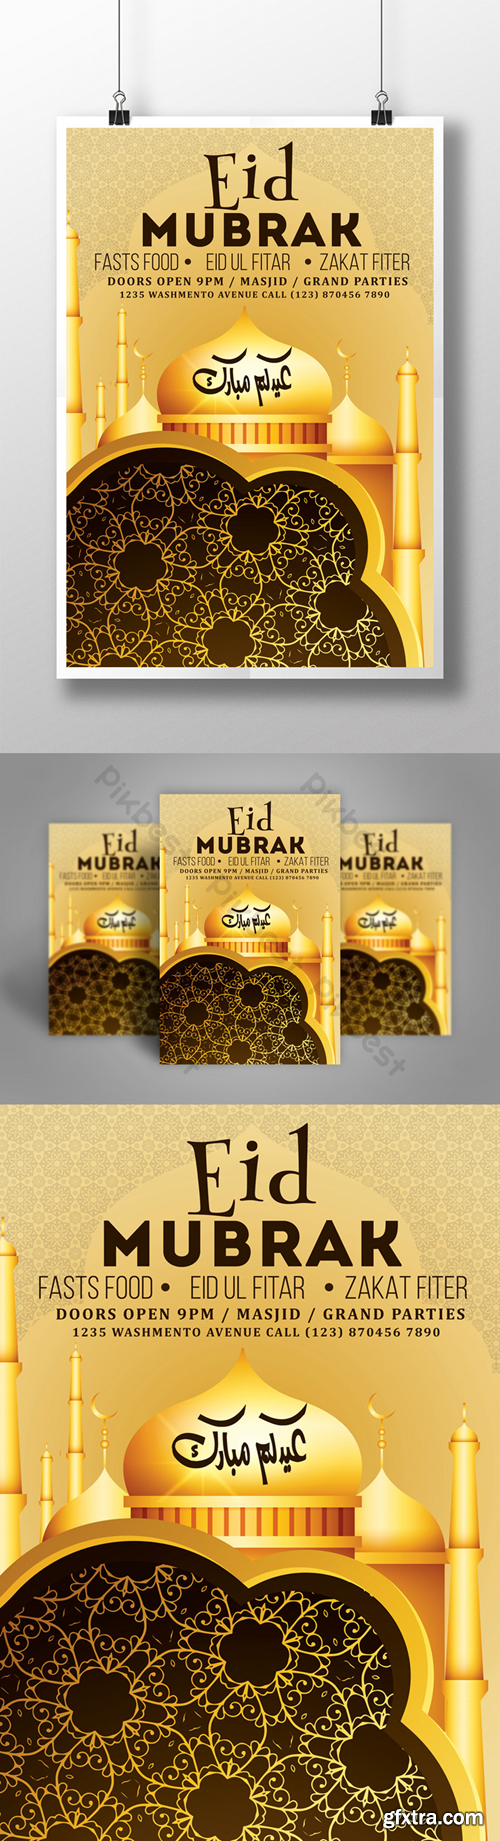 Latest Ramadan Flyer Templates with Mosques in Golden Style Template PSD